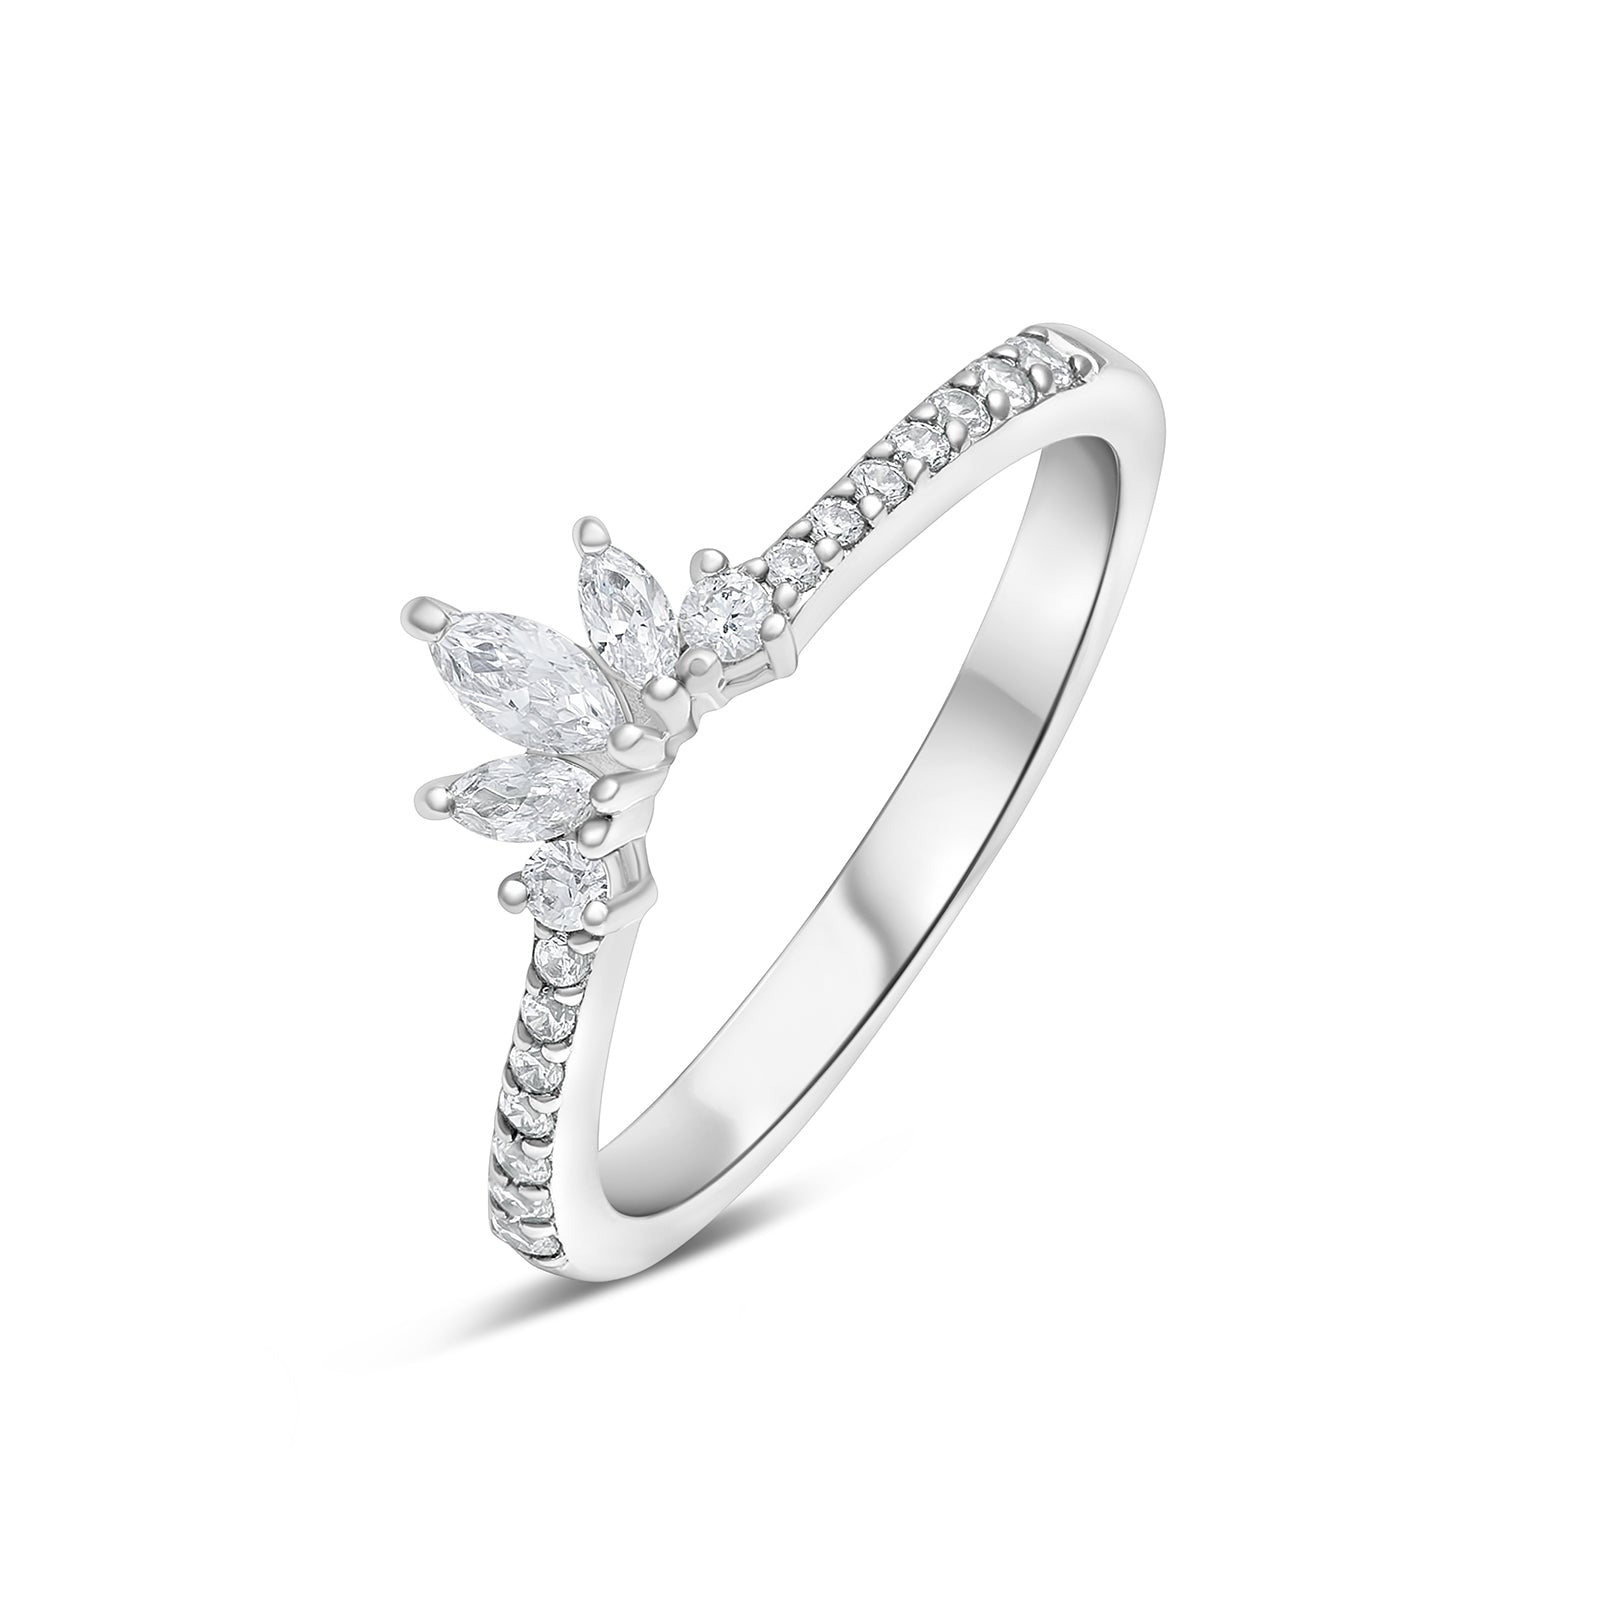 stunning v-shaped band features 3 center marquise stones with round stones glistening down the sides. 